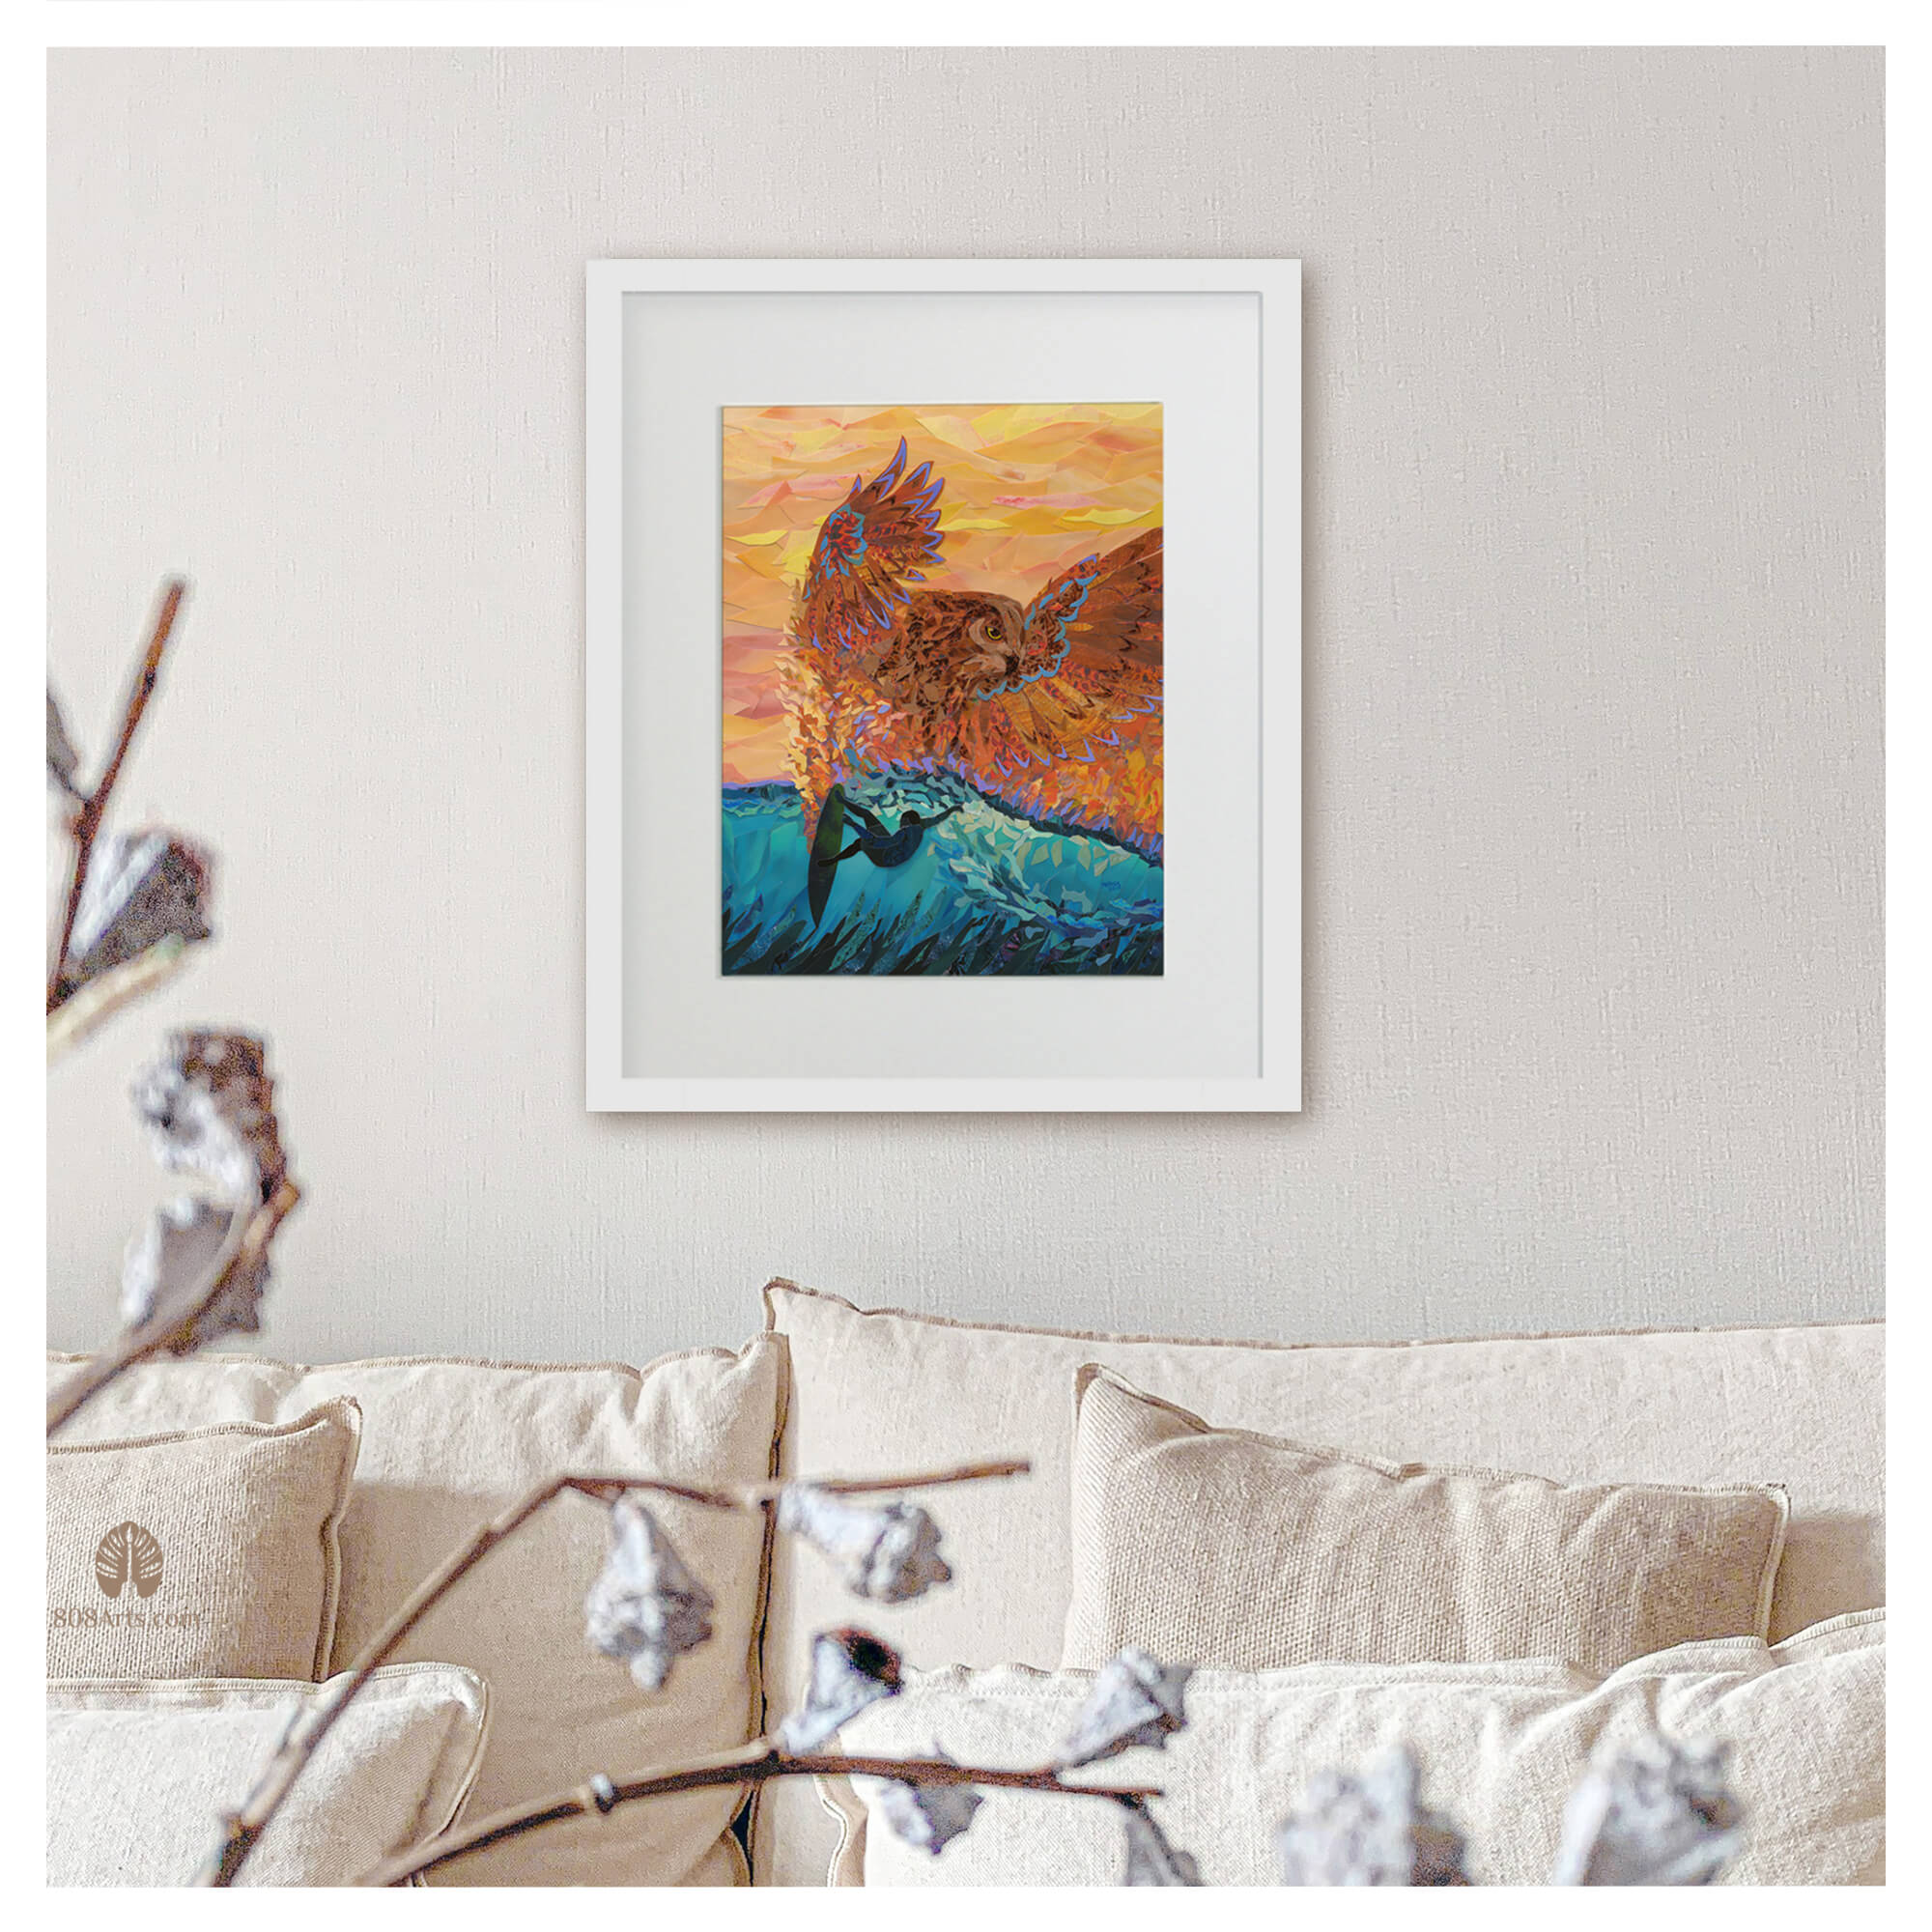 A framed matted art print featuring a collage of a surfer riding the epic wave of Hawaii and a vibrant orange-hued owl by Hawaii artist Patrick Parker